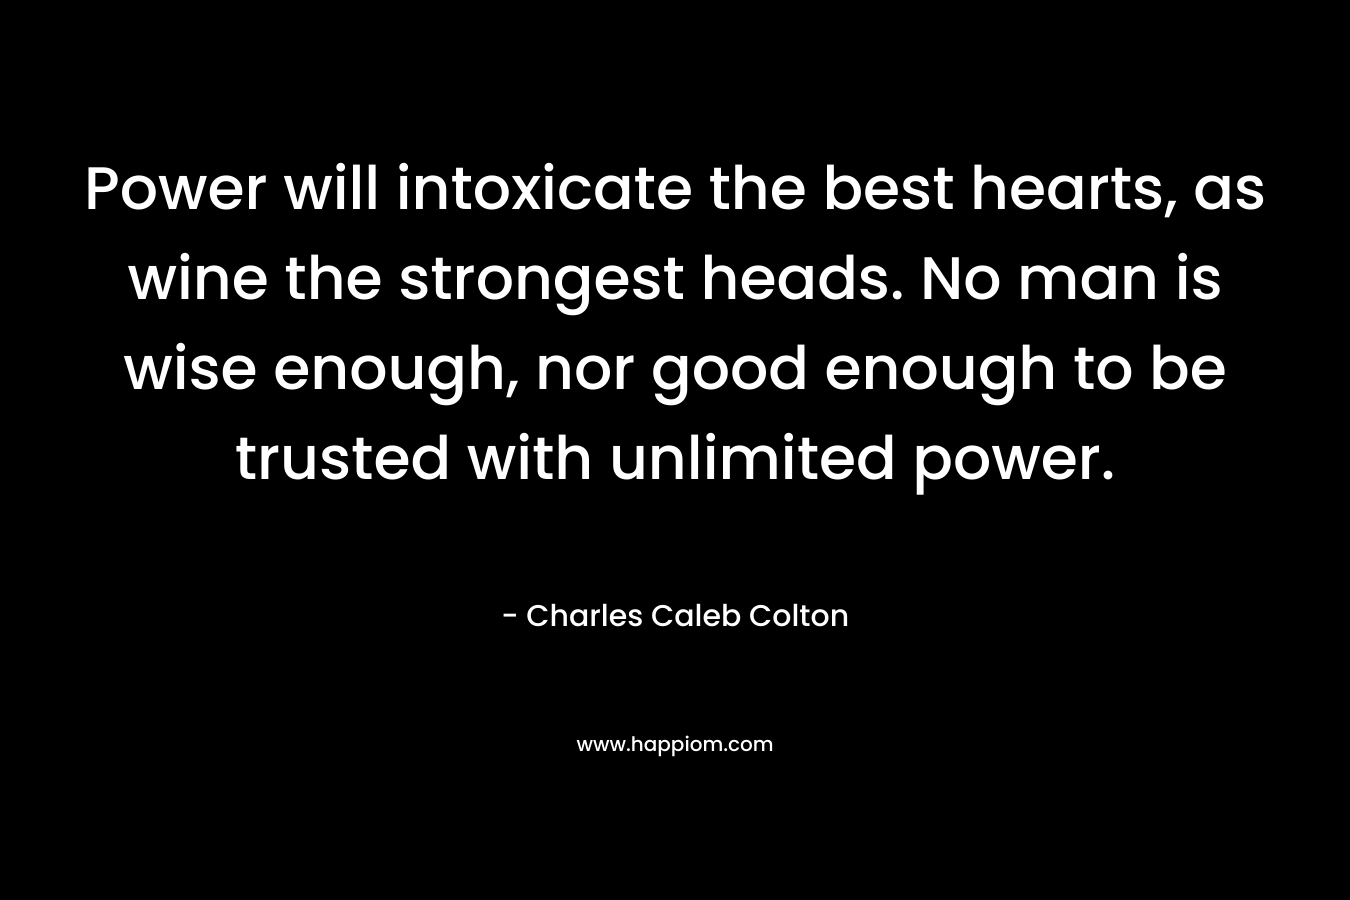 Power will intoxicate the best hearts, as wine the strongest heads. No man is wise enough, nor good enough to be trusted with unlimited power. – Charles Caleb Colton